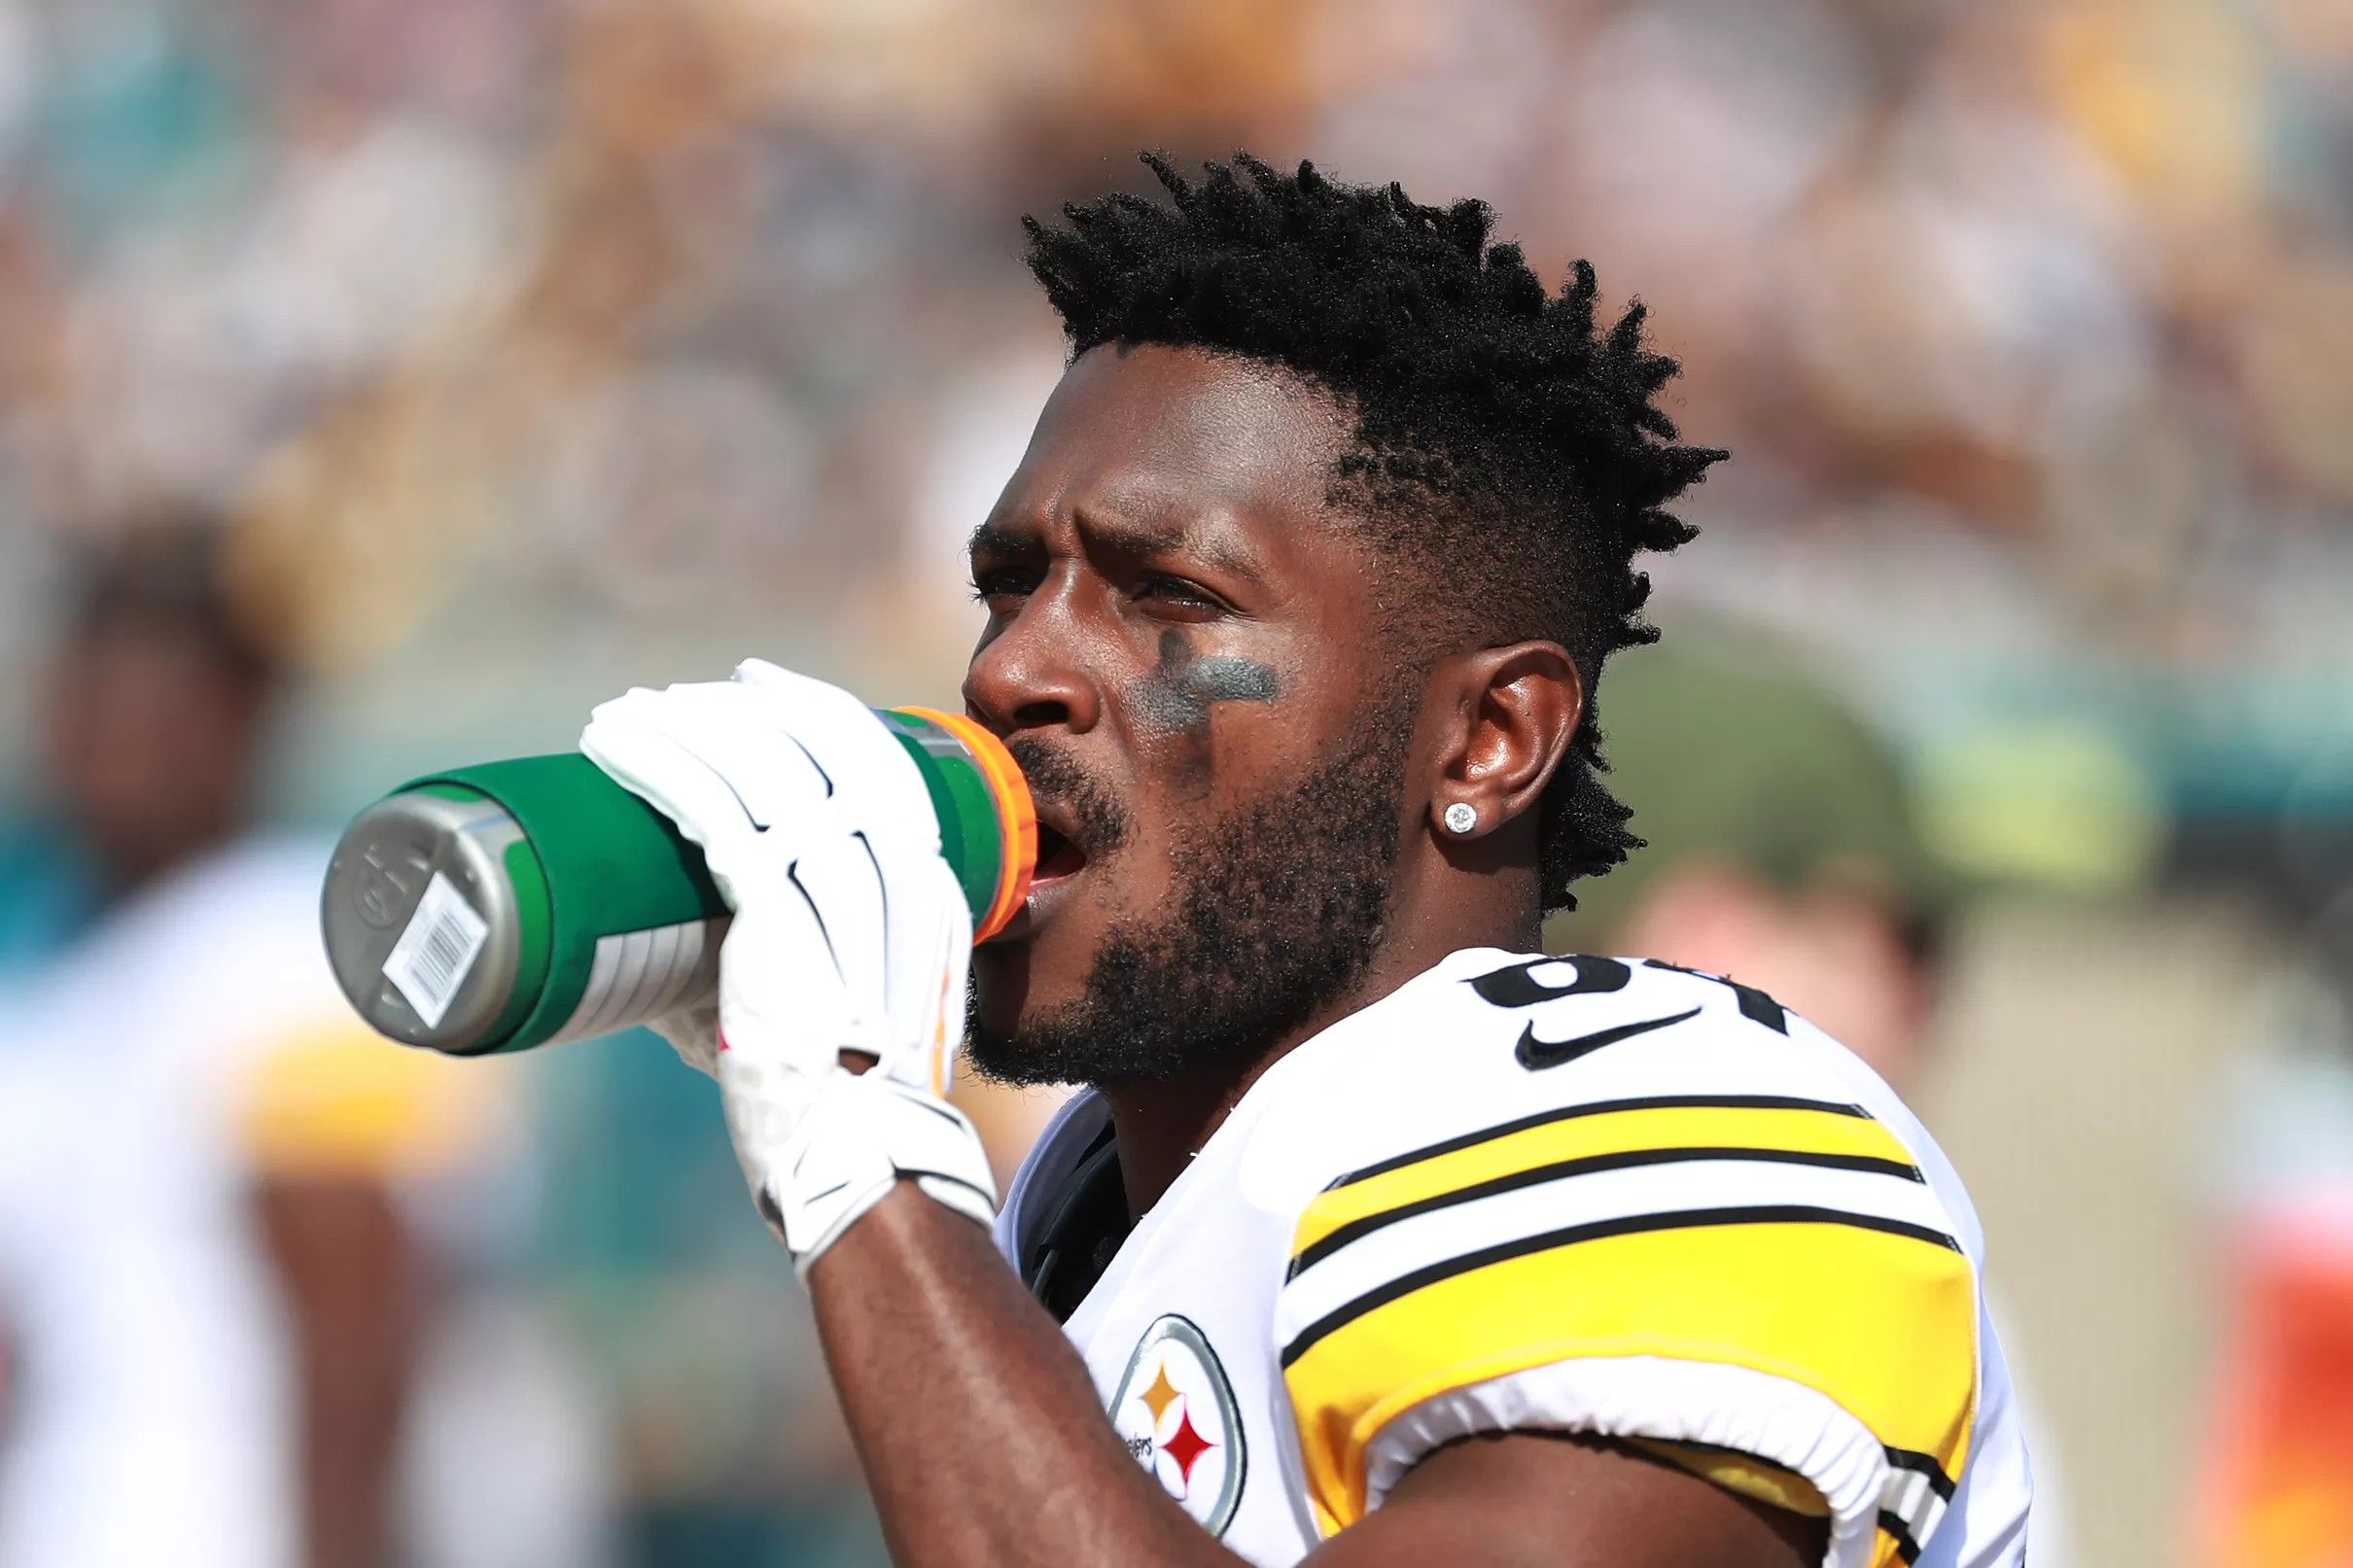 Antonio Brown introduced to the Raiders, tells his own truth regarding